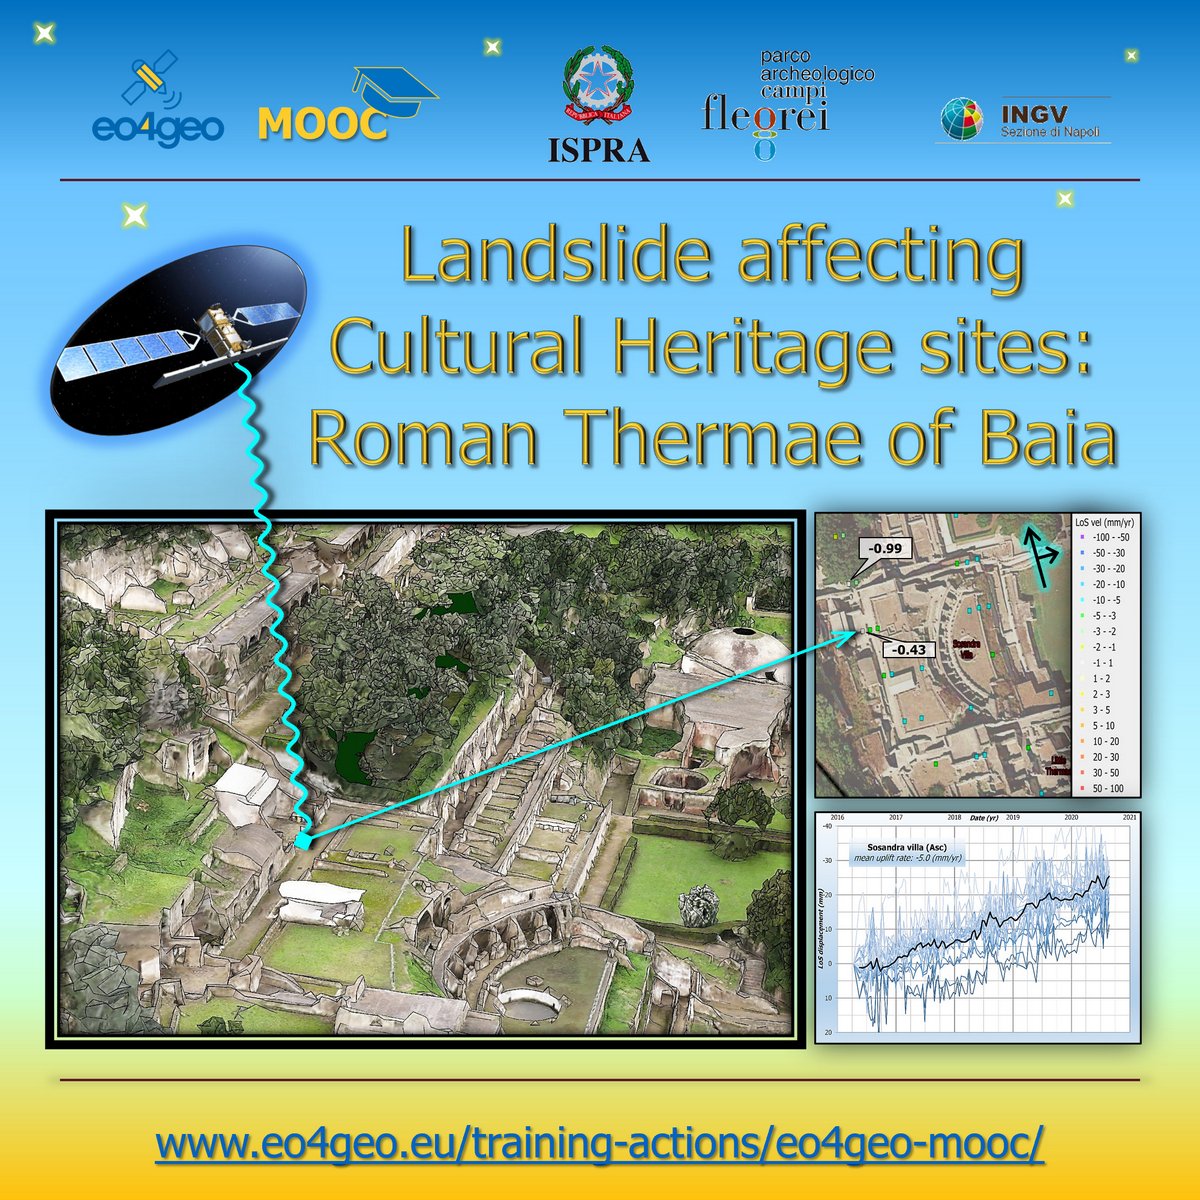 Corso di formazione online (MOOC) “Landslide affecting Cultural Heritage sites - Roman Thermae of Baia”